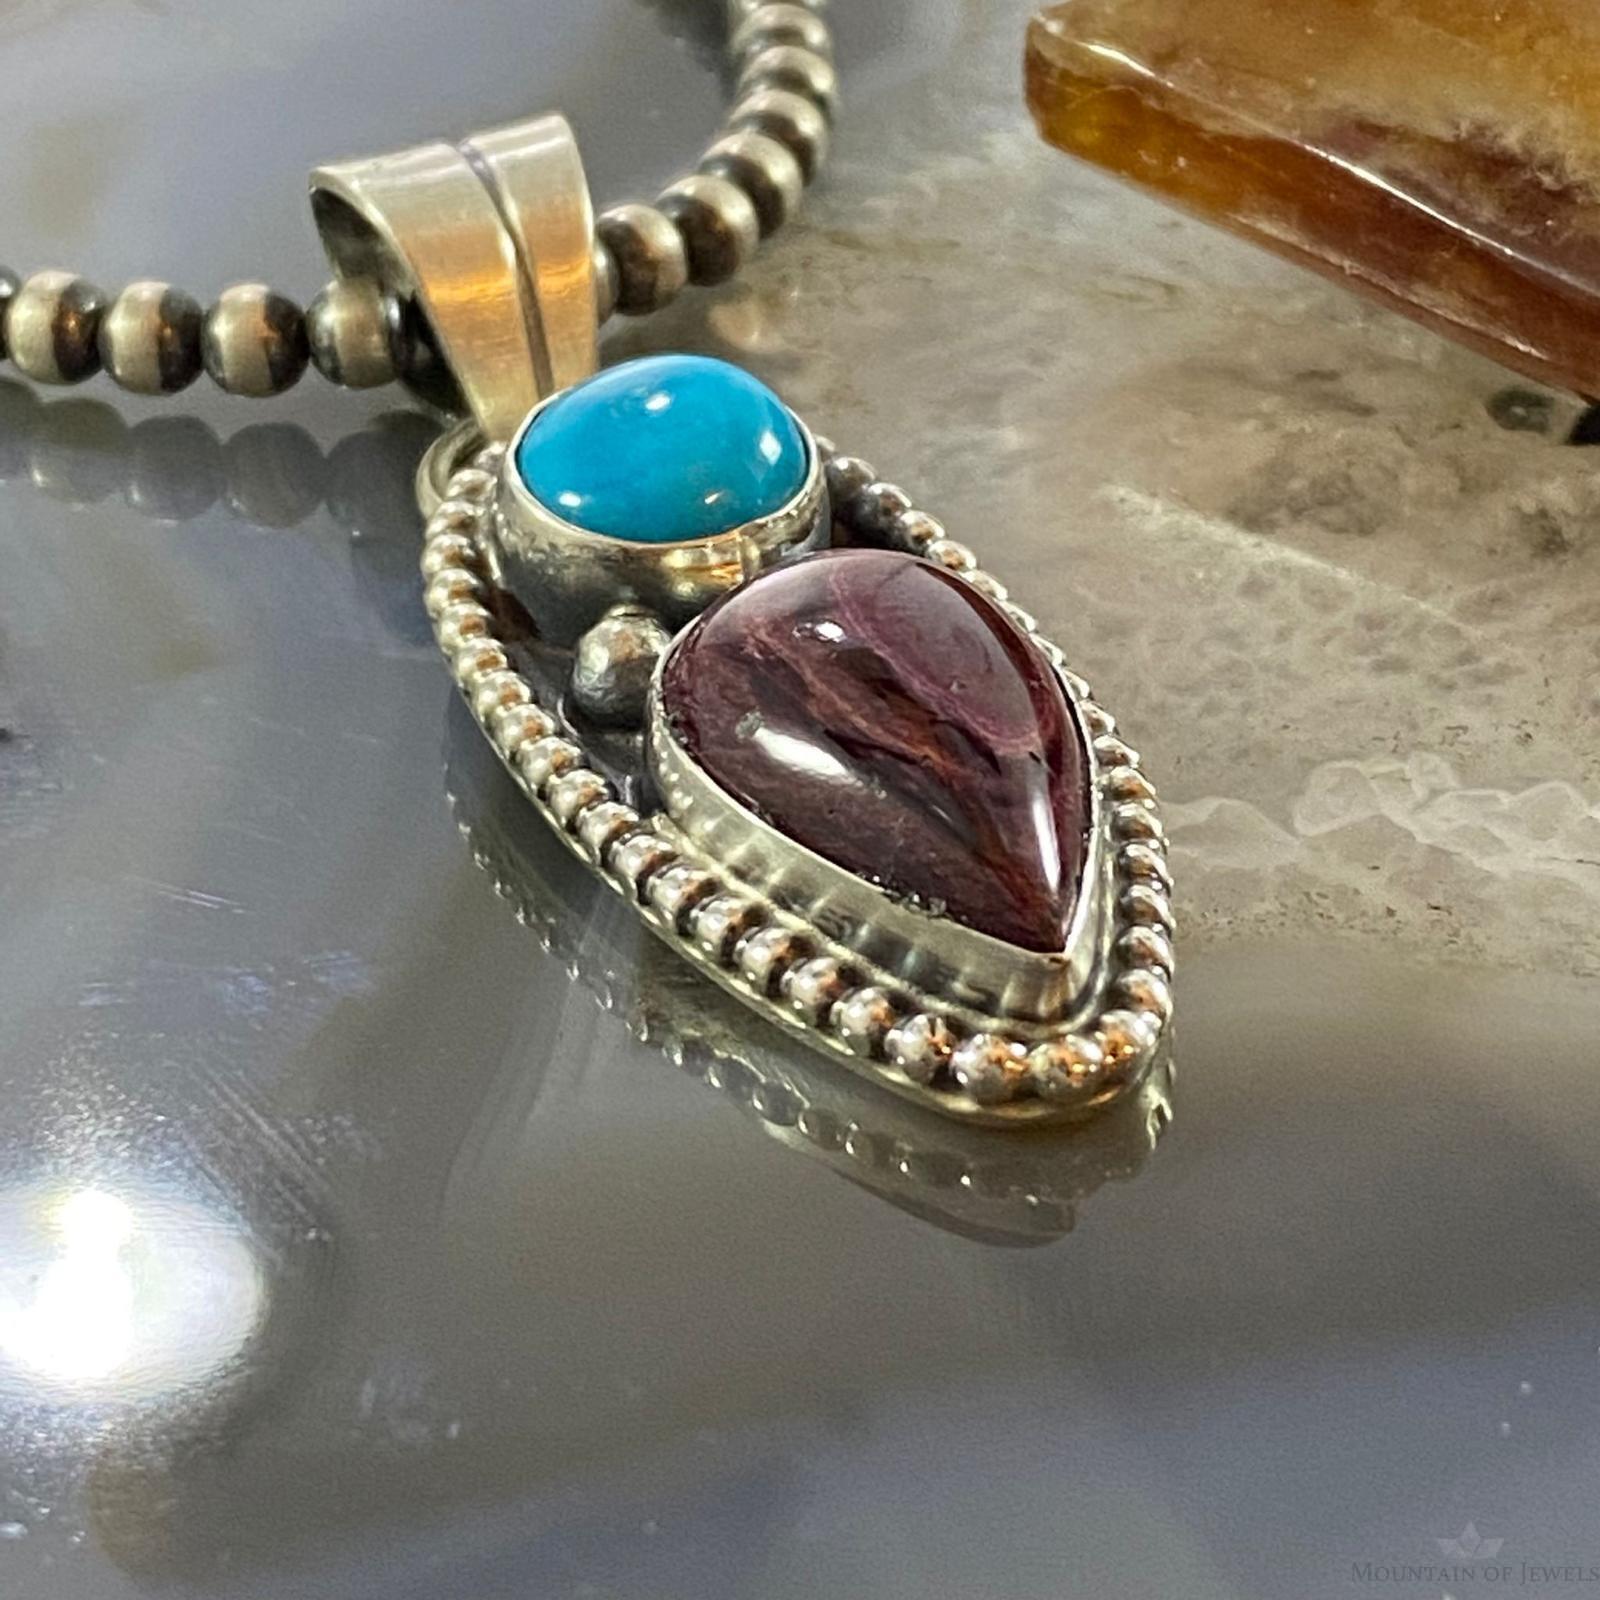 Native American Sterling Sleeping Beauty Turquoise/Purple Spiny Oyster Pendant - Mountain of Jewels